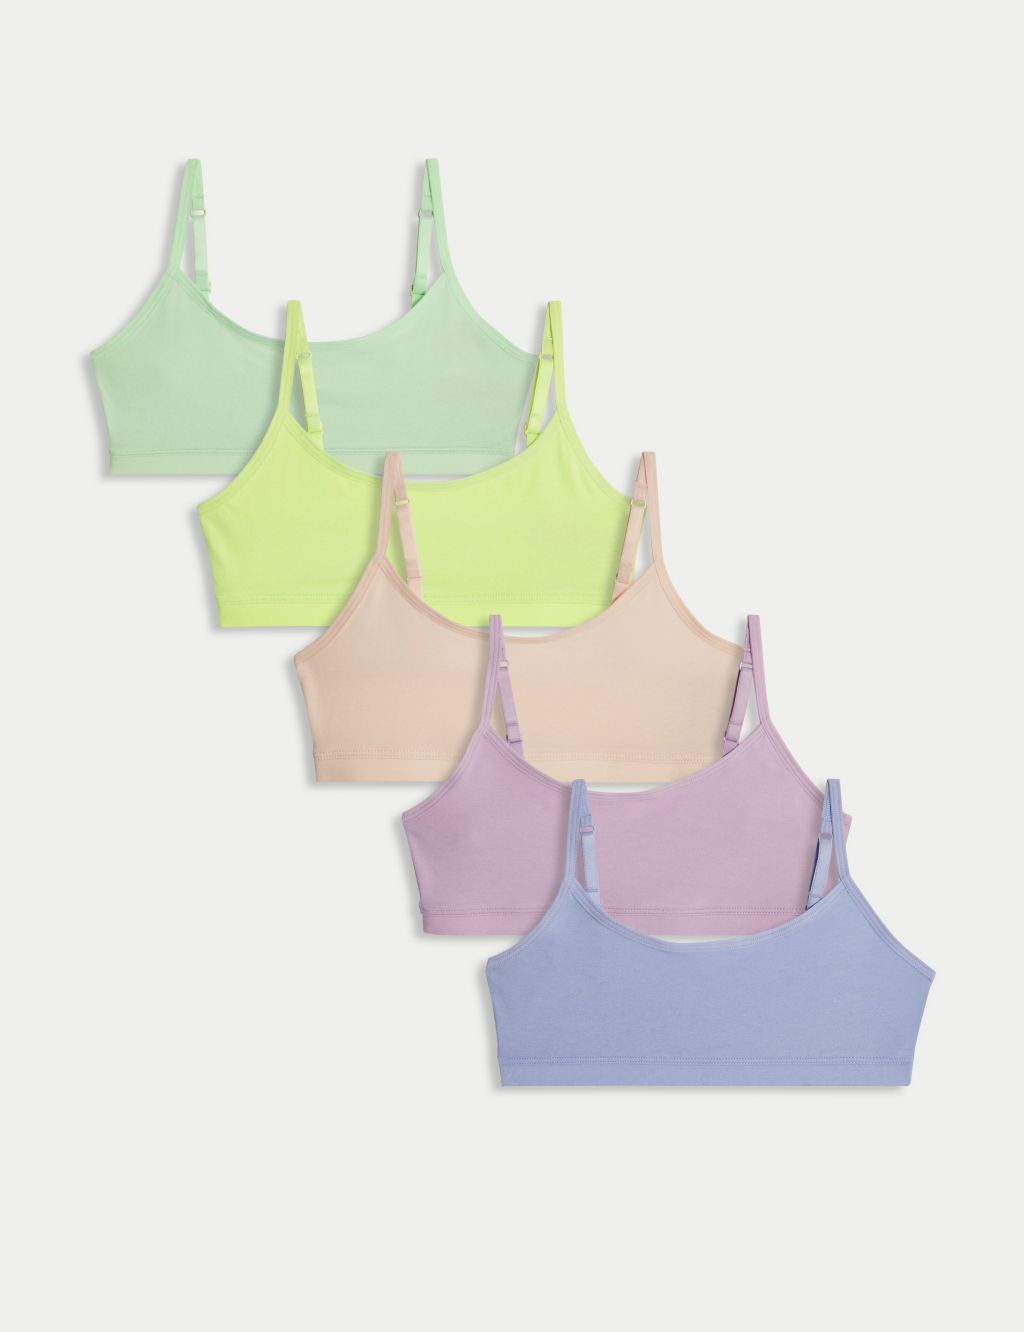 DEENAGER COTTON CAMI BRA FOR GIRLS (10 to 12 YEARS) PACK OF 6